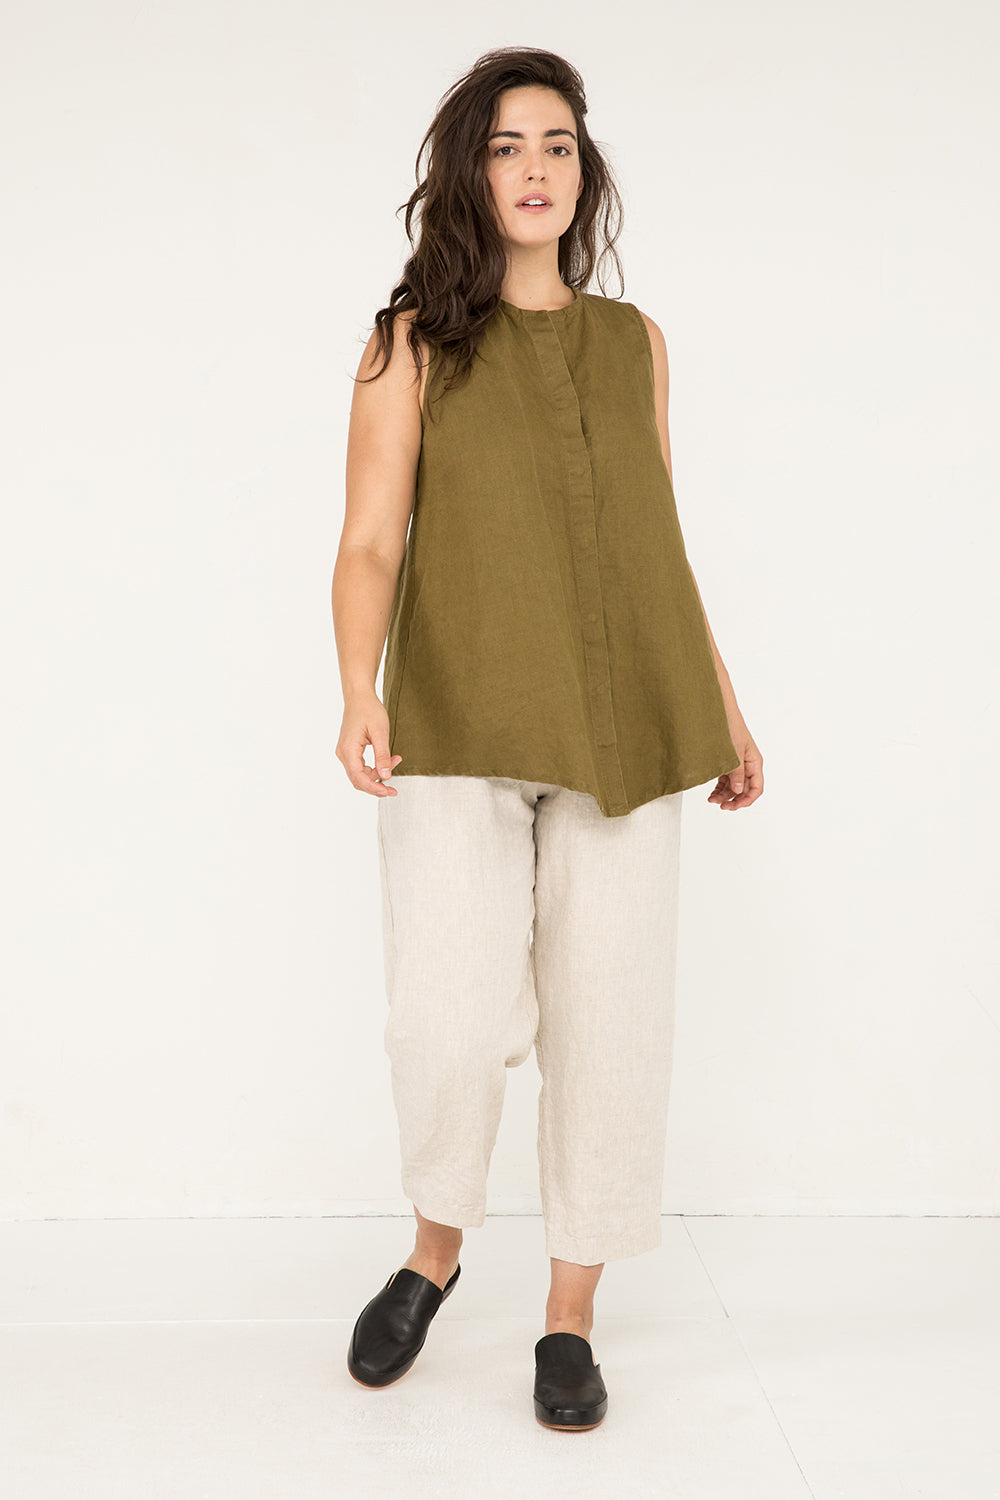 Sleeveless Kara Snap Top in Midweight Linen Olive#color_olive